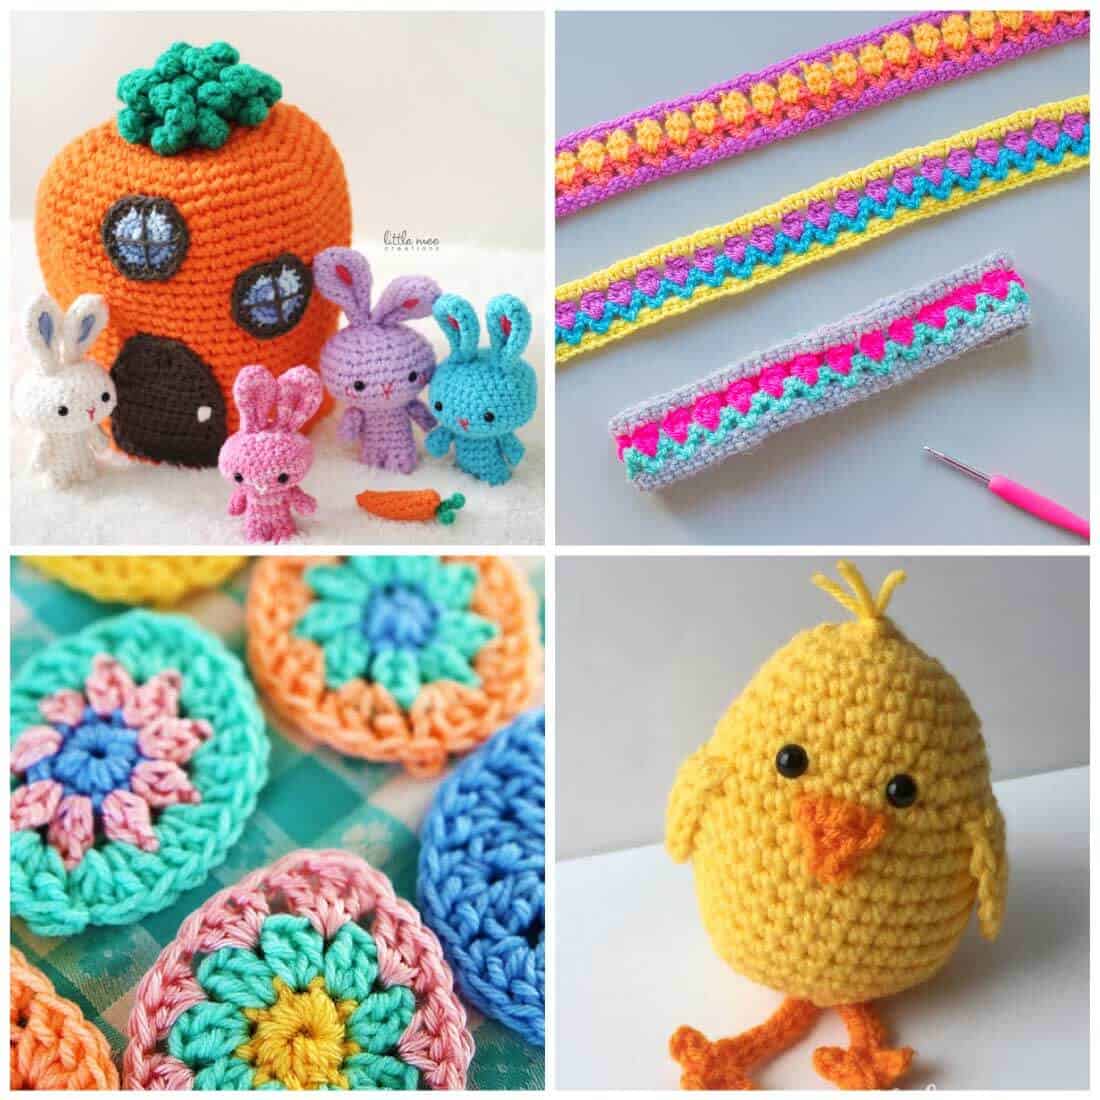 Free Crochet Patterns | Crochet Patterns for Easter | Crochet Patterns for Spring | Flower Crochet Patterns | Fun Crochet Patterns | Use these adorable free crochet patterns to make something that will get you in the mood for Spring. These fun patterns are perfect for Easter baskets and more!